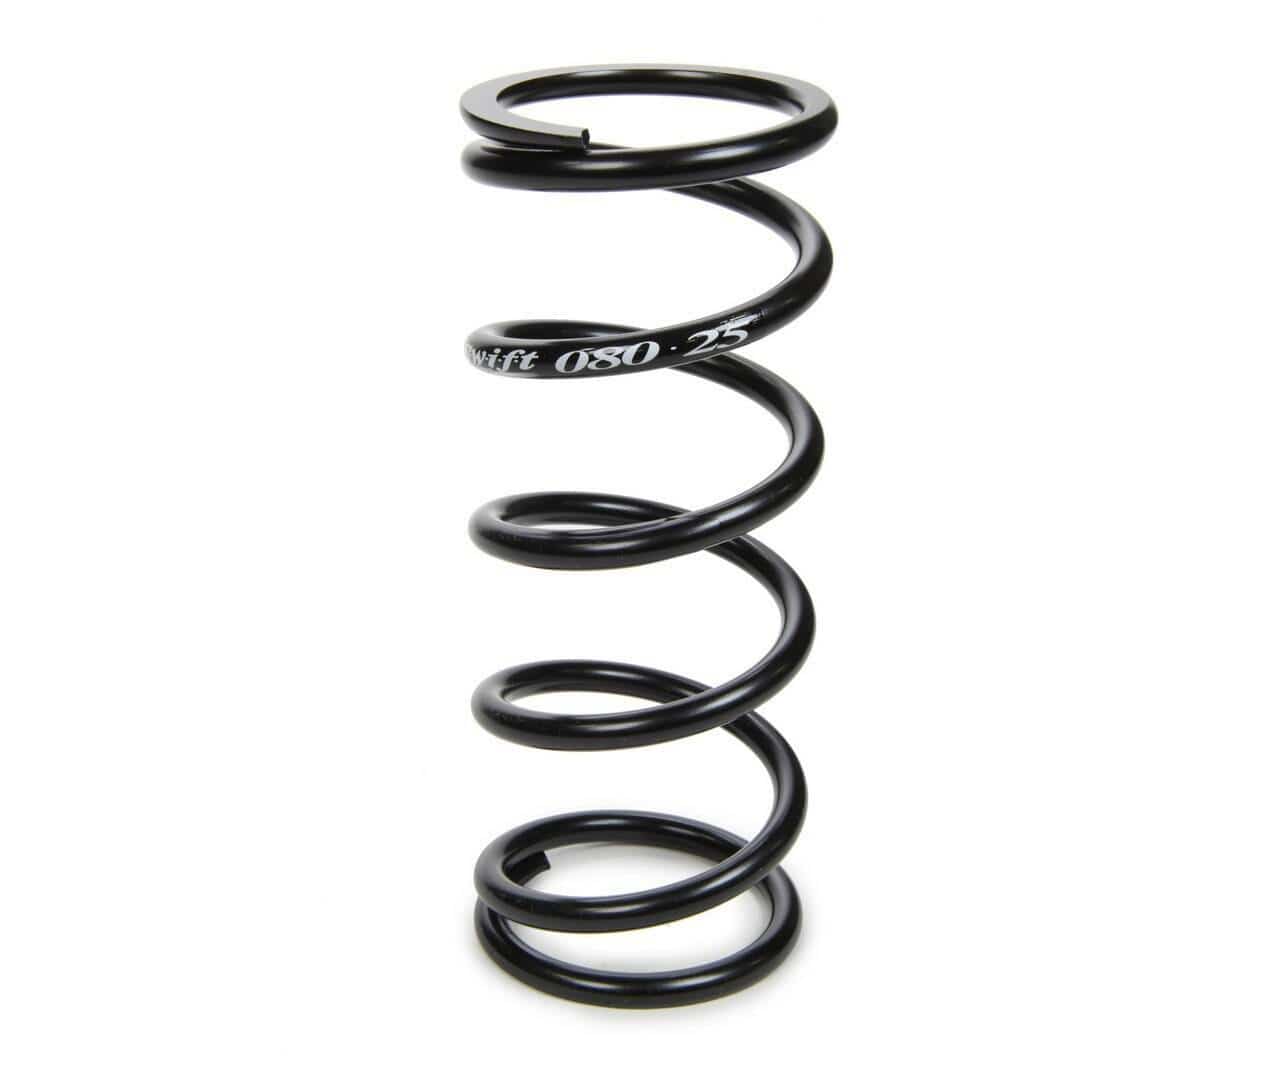 Swift Springs Standard Coilover Spring (Barrel Type) - ID 2.5", 14" Length